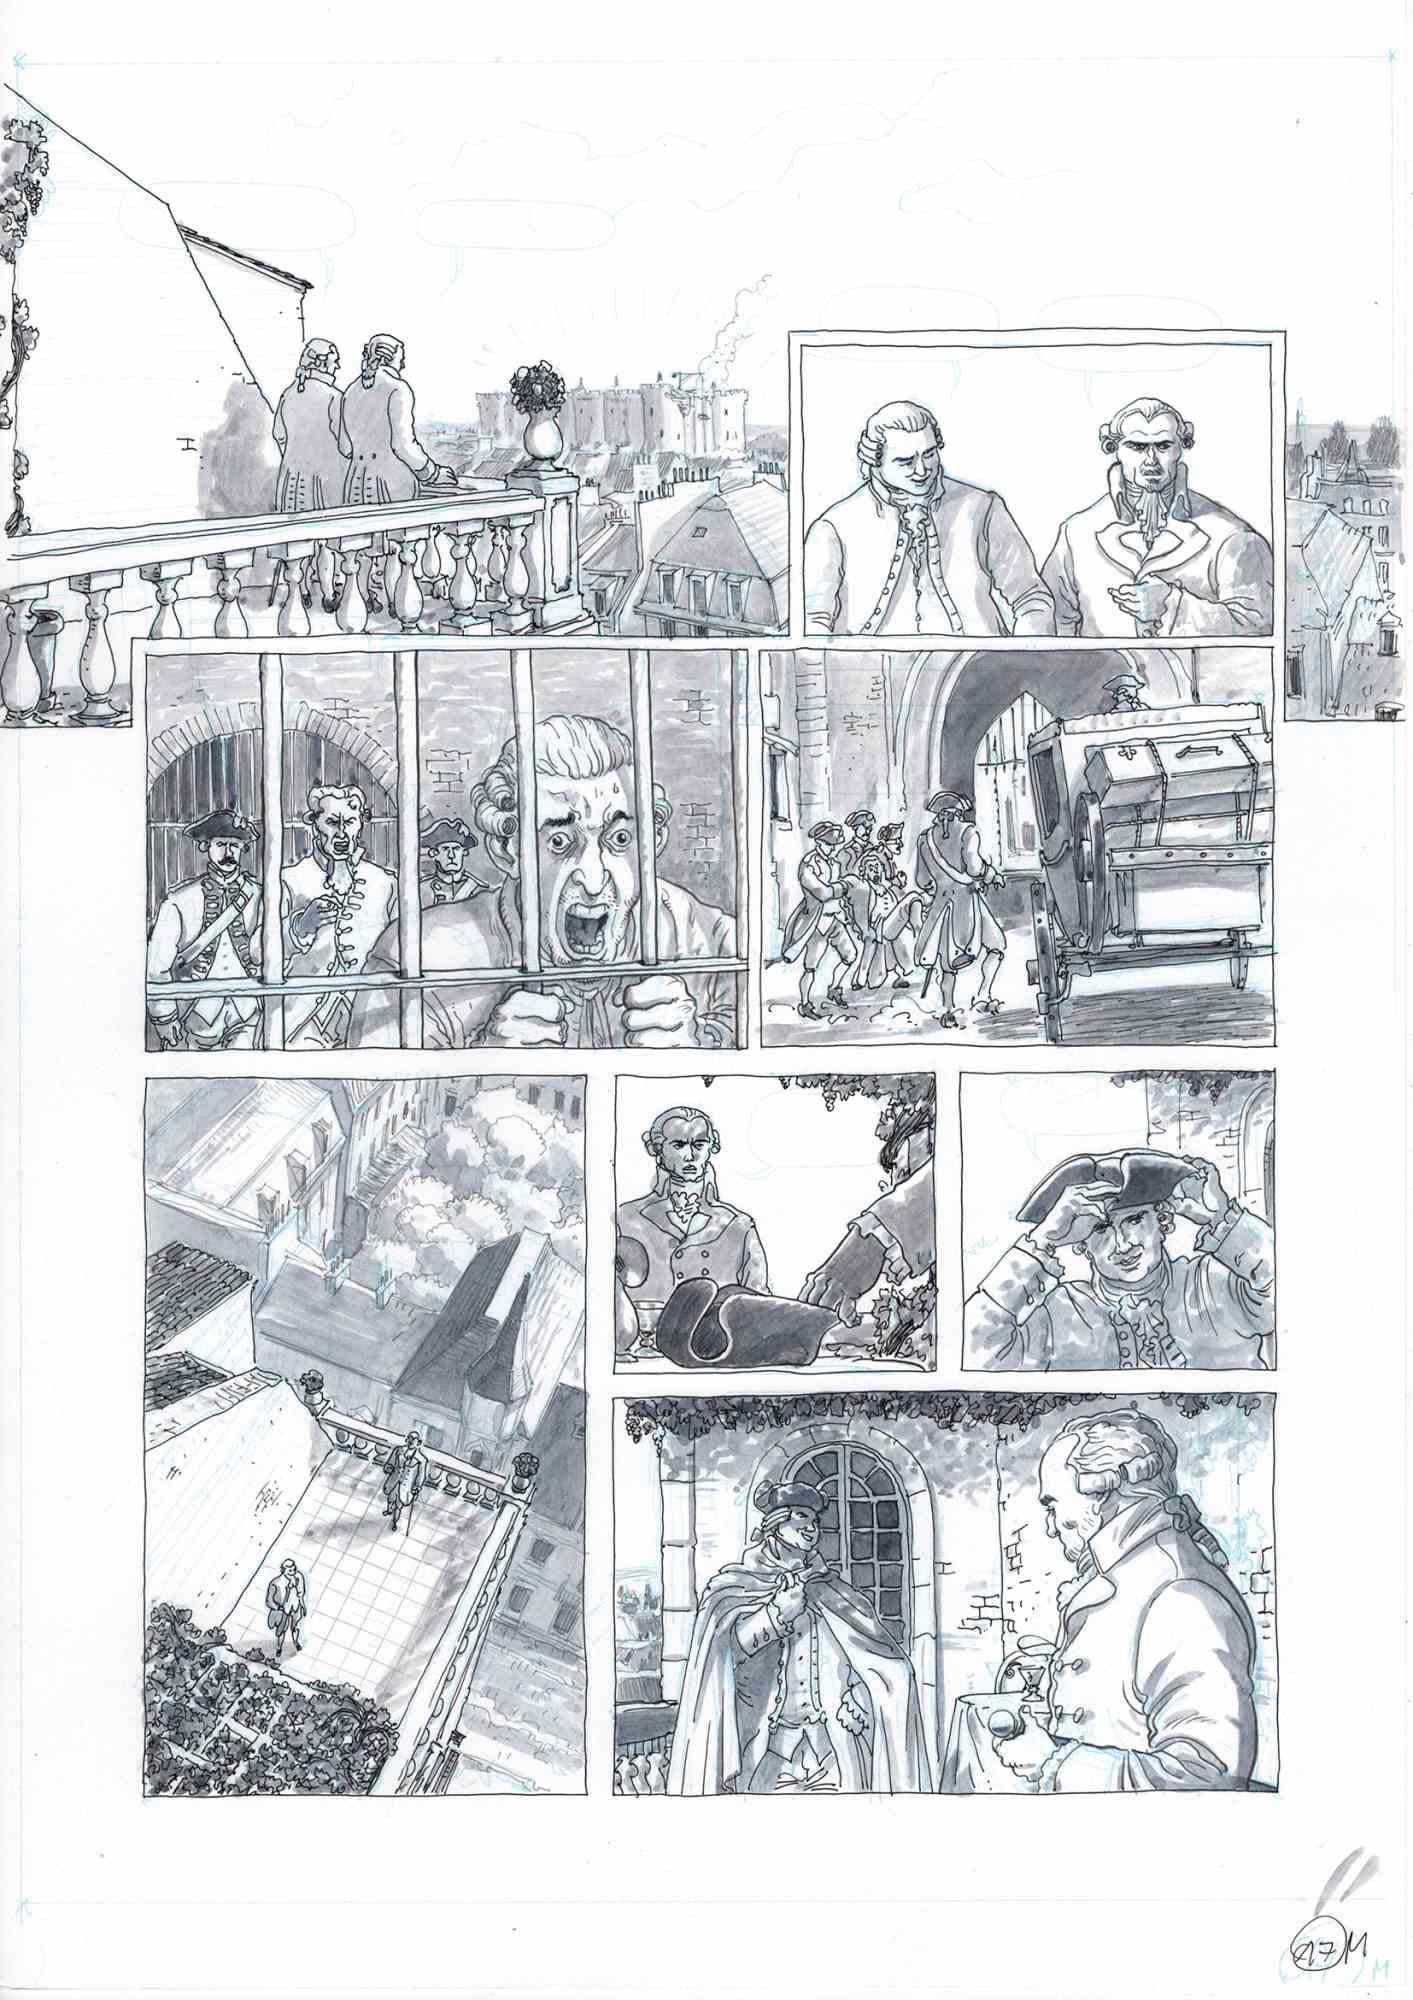 This work entitled "Beaumarchais speaks about Bastille" is a comic board belonging to the graphic novel published by Glènat Edition in 2019 "1789 - La mort d'un monde". The work was made by Vincenzo Bizzarri between 2018 and 2019, total work